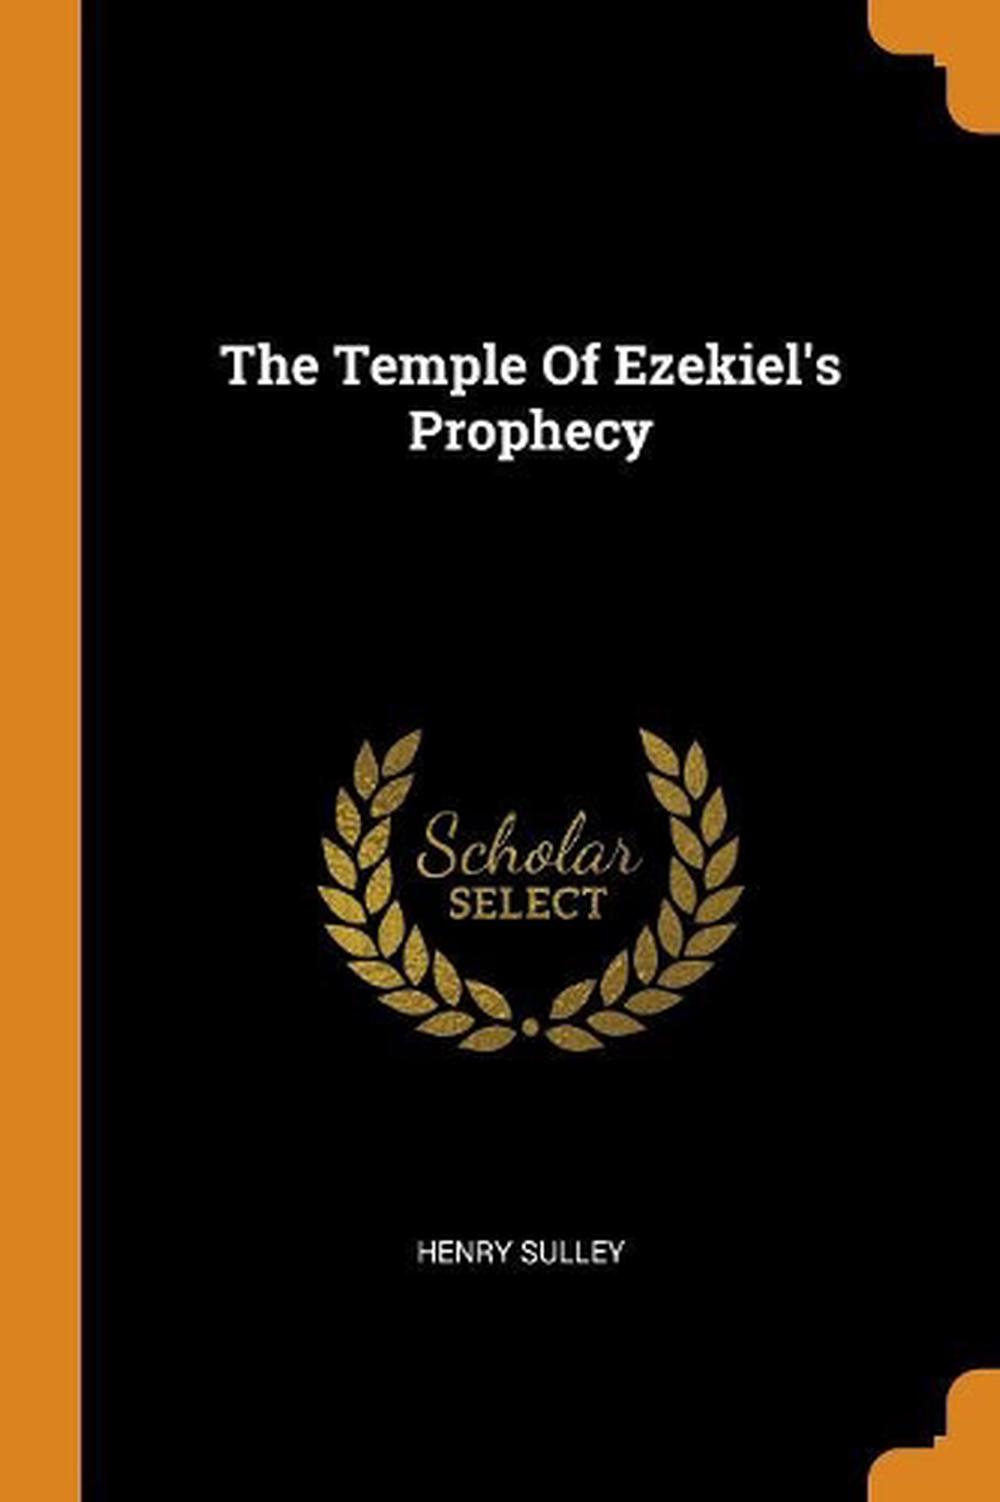 The Temple of Ezekiel's Prophecy by Henry Sulley (English) Paperback ...